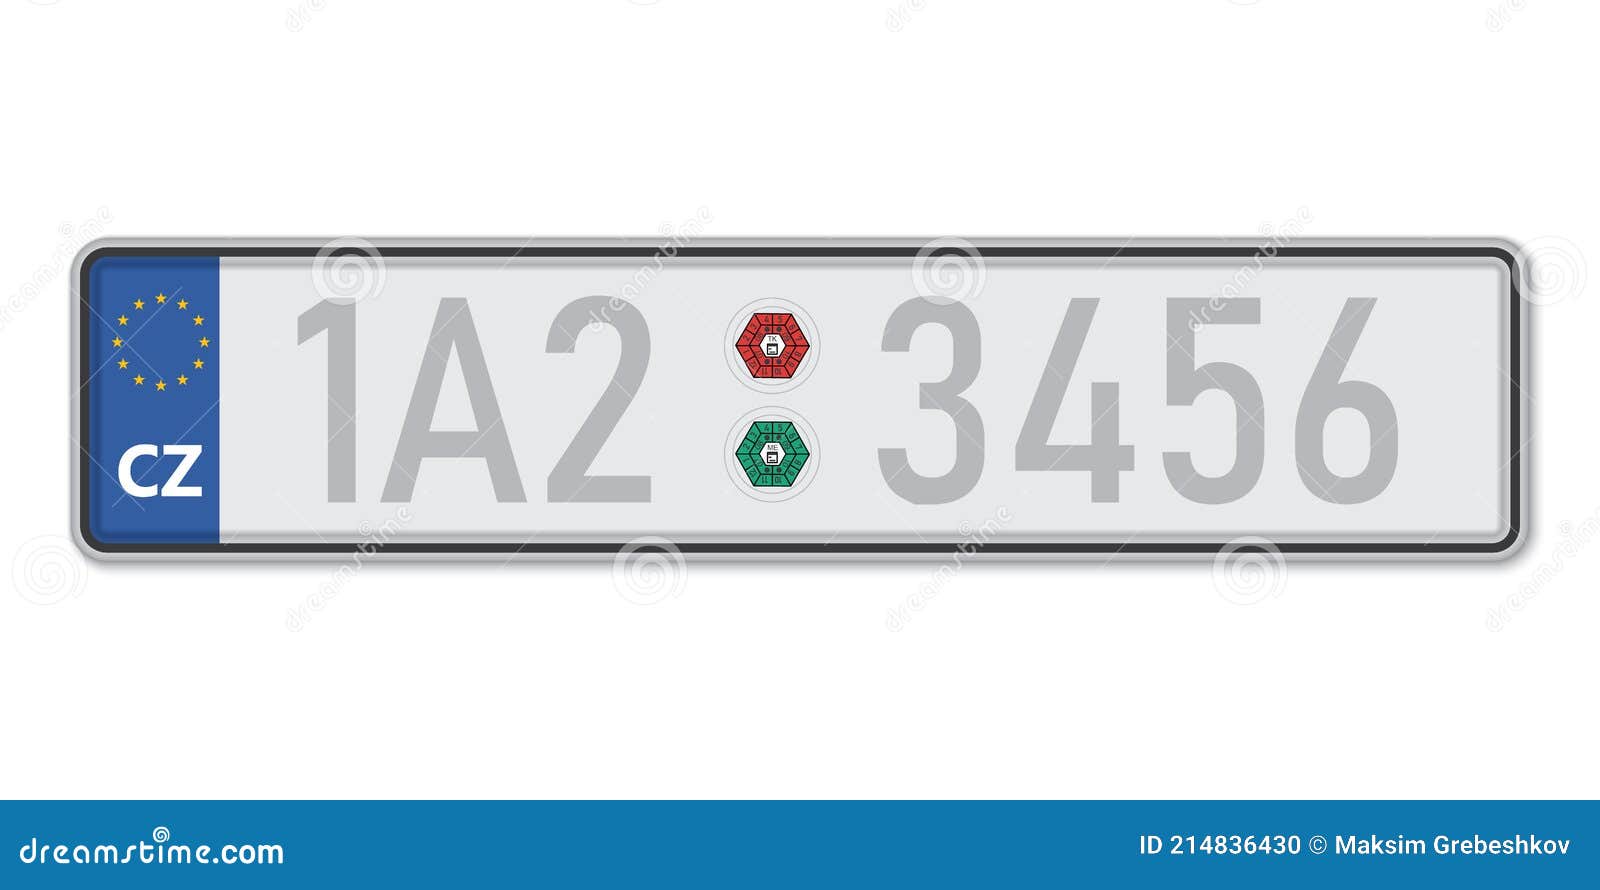 Sizes number plate Number Plates